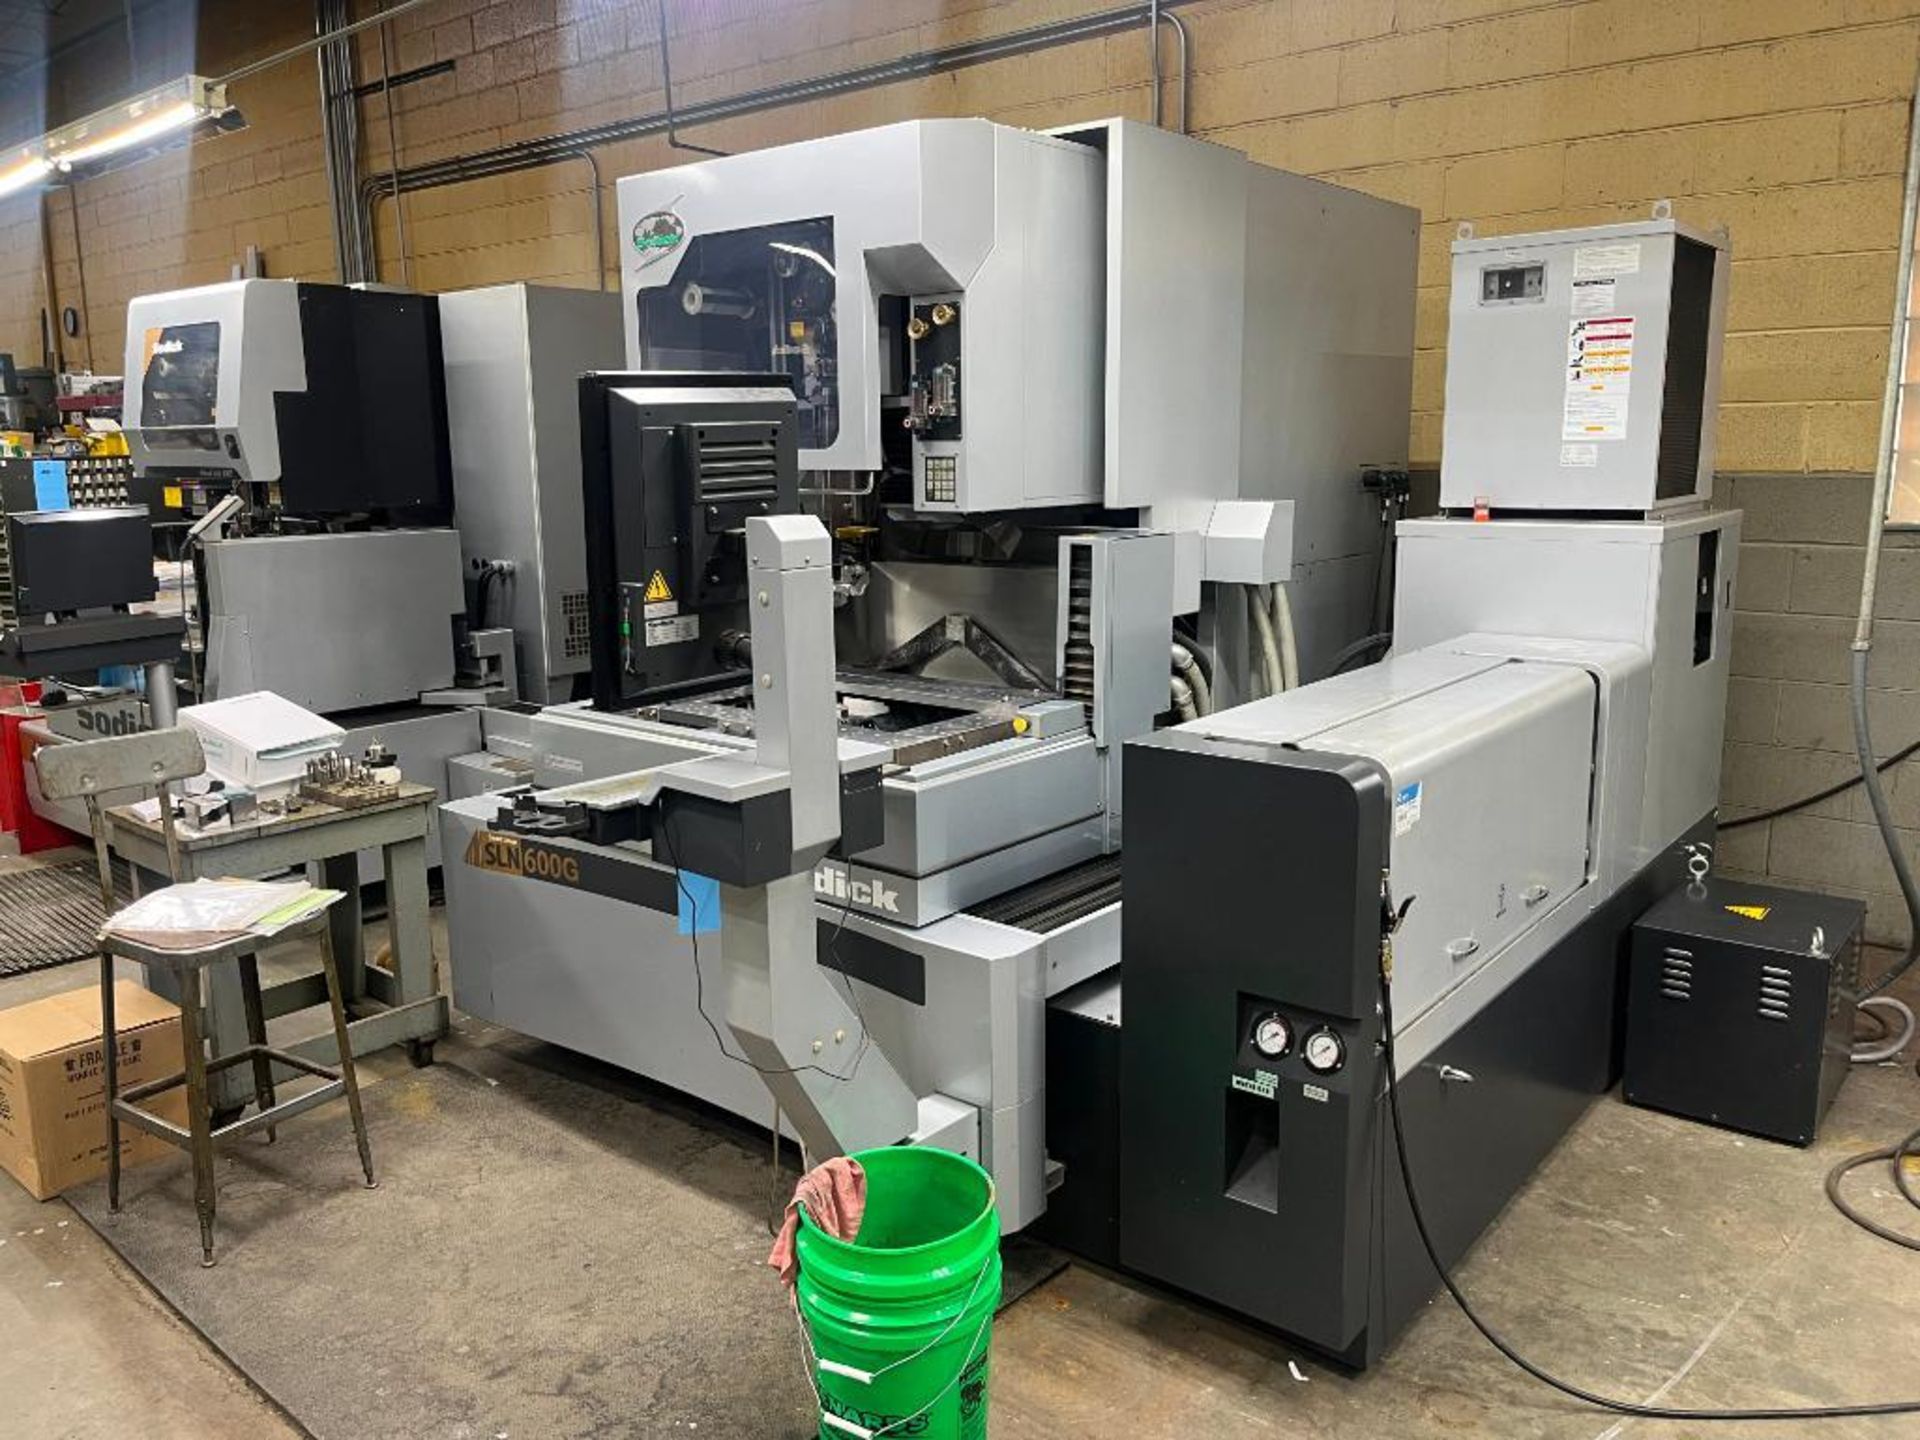 Sodick CNC Wire-Cut EDM Machine Model SLN600G, S/N T0632 (2015) with Sodick SPW CNC Control. With 10 - Image 2 of 43